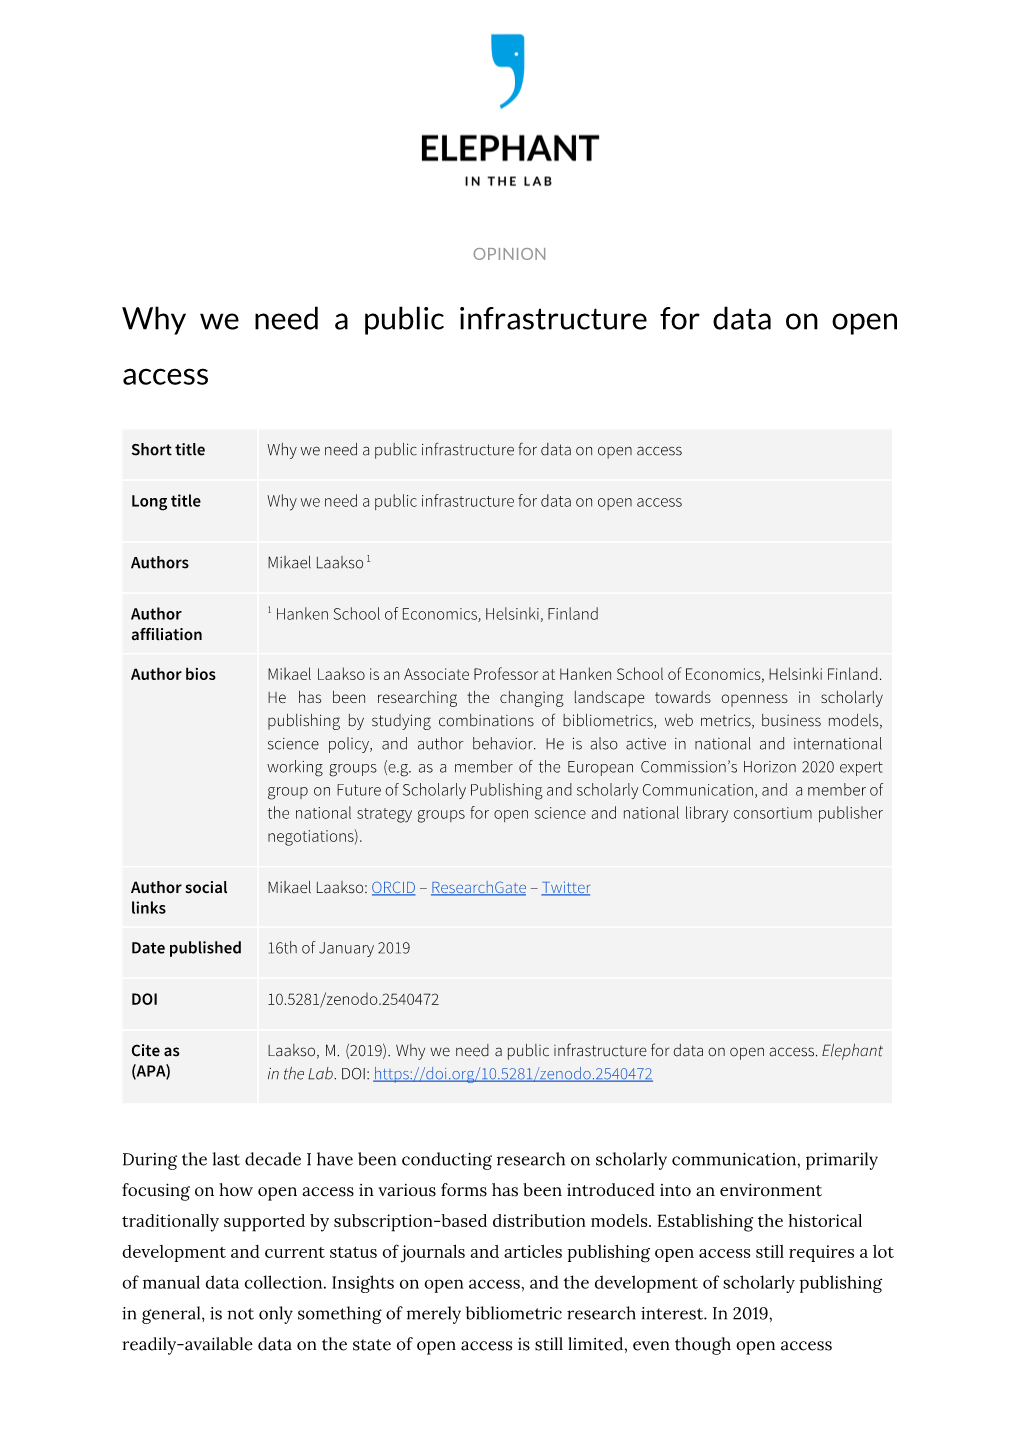 Why We Need a Public Infrastructure for Data on Open Access